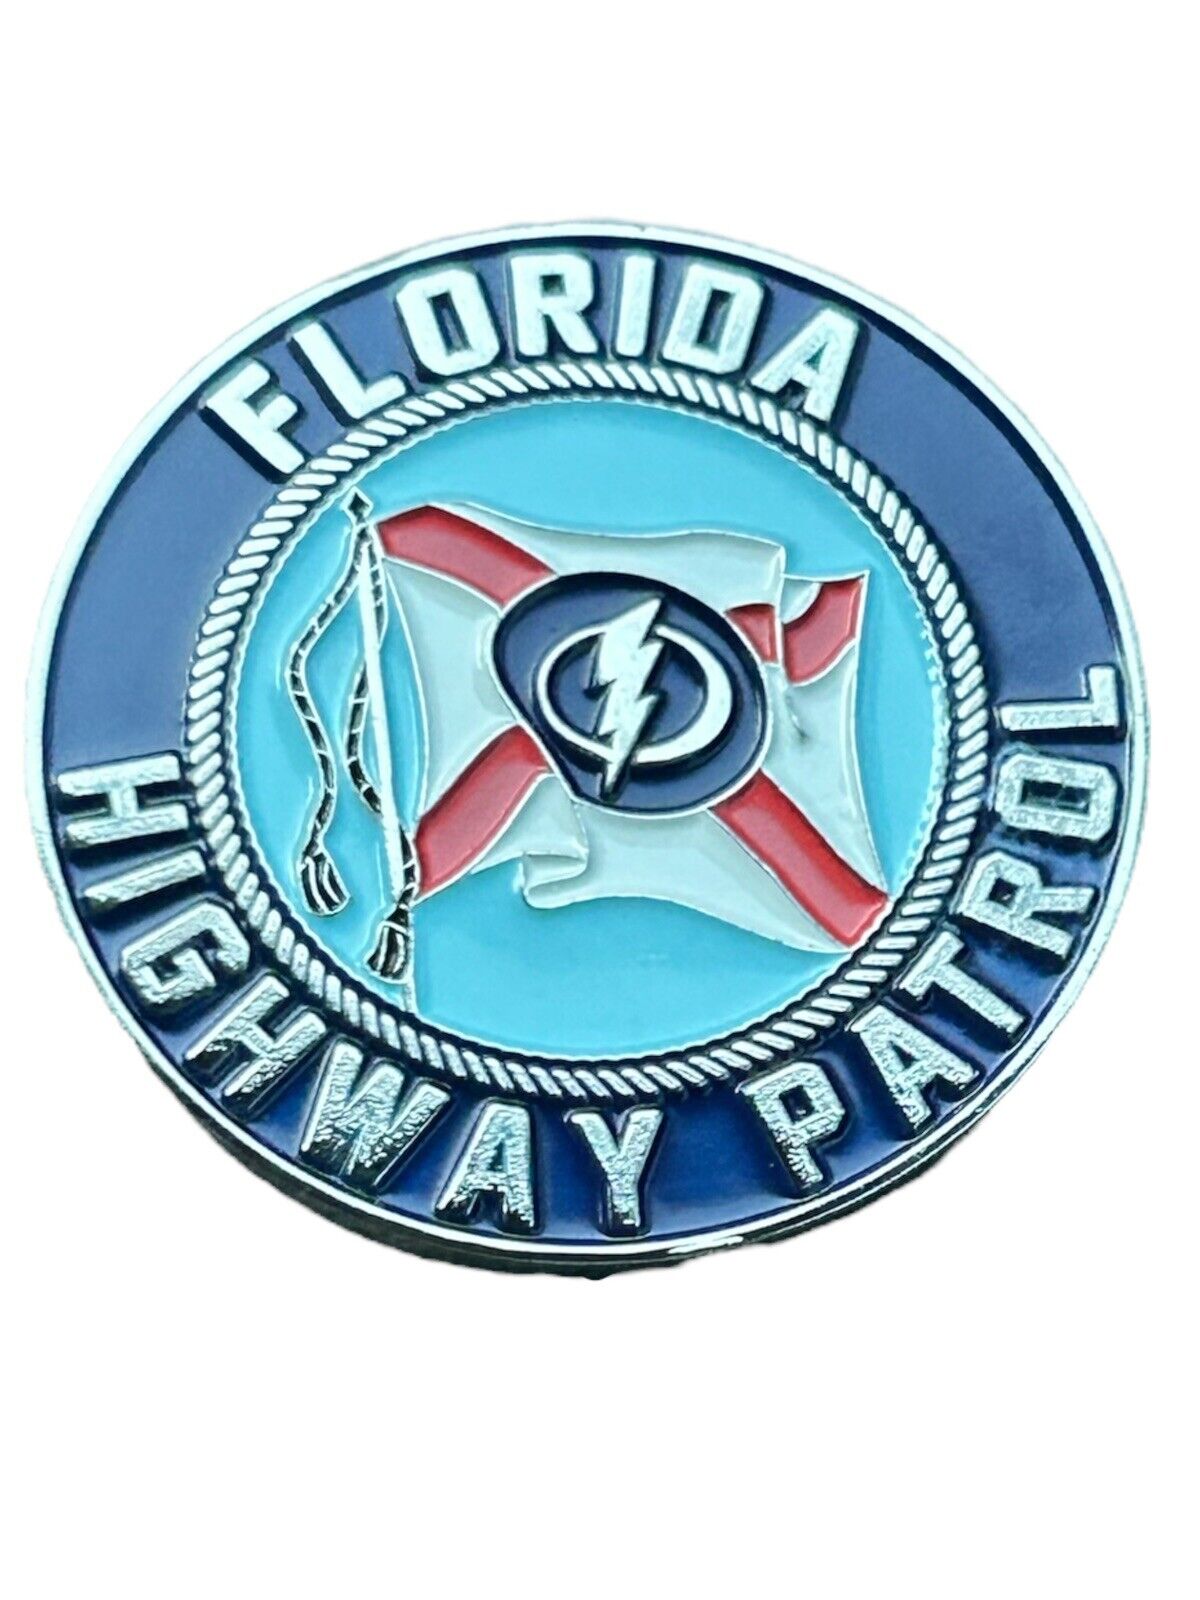 Florida Highway Patrol FHP 2020 Stanley Cup Champions Challenge Coin Trooper FL